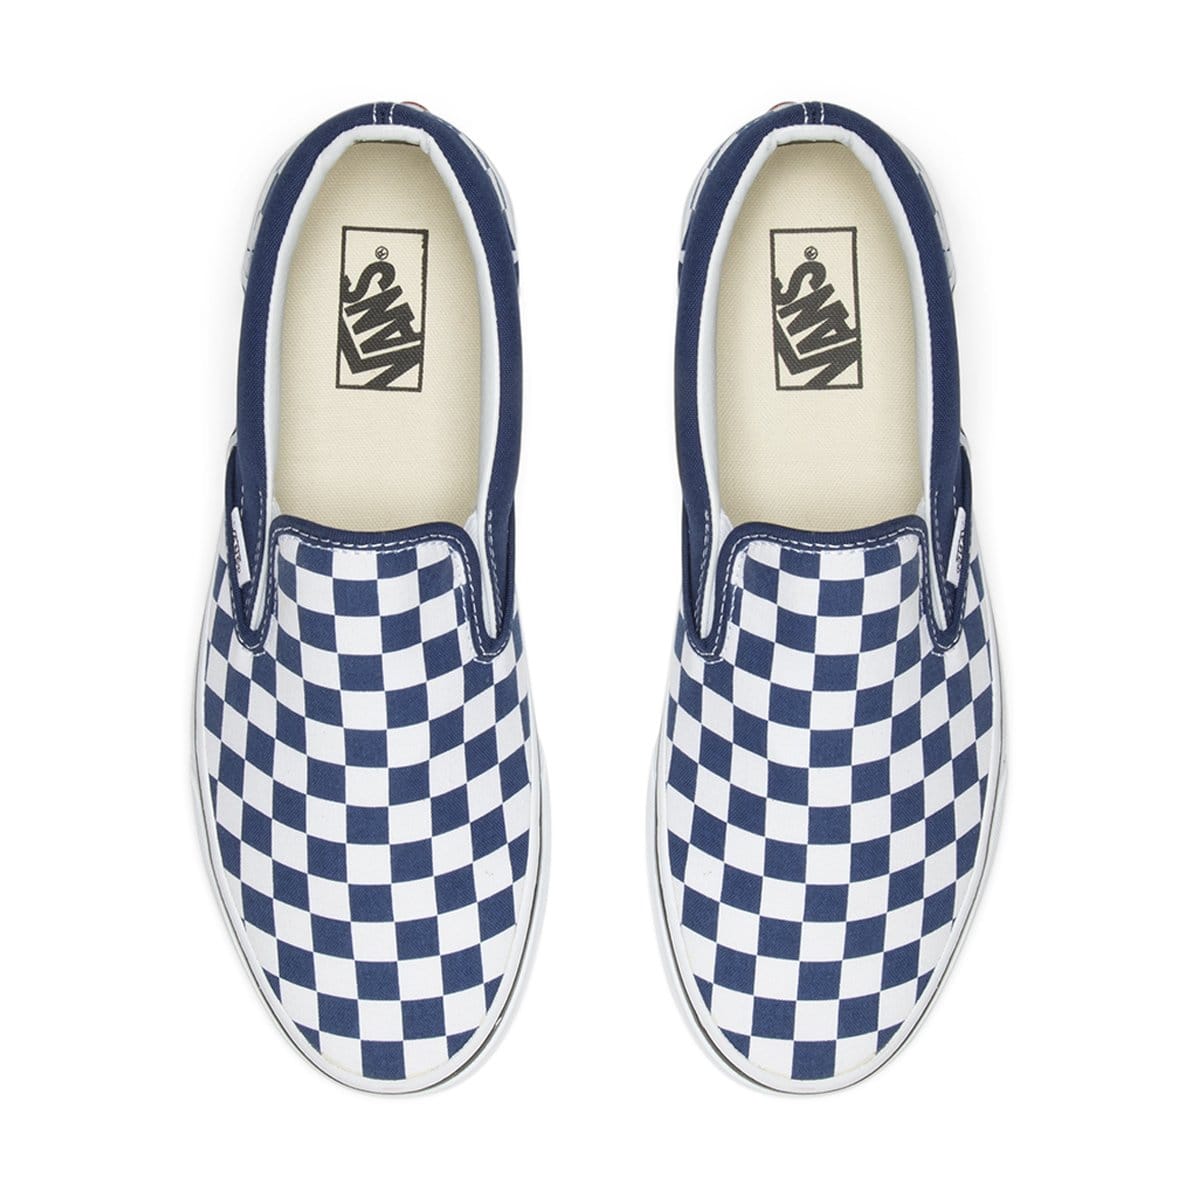 Vans Shoes CLASSIC SLIP-ON (CHECKERBOARD)